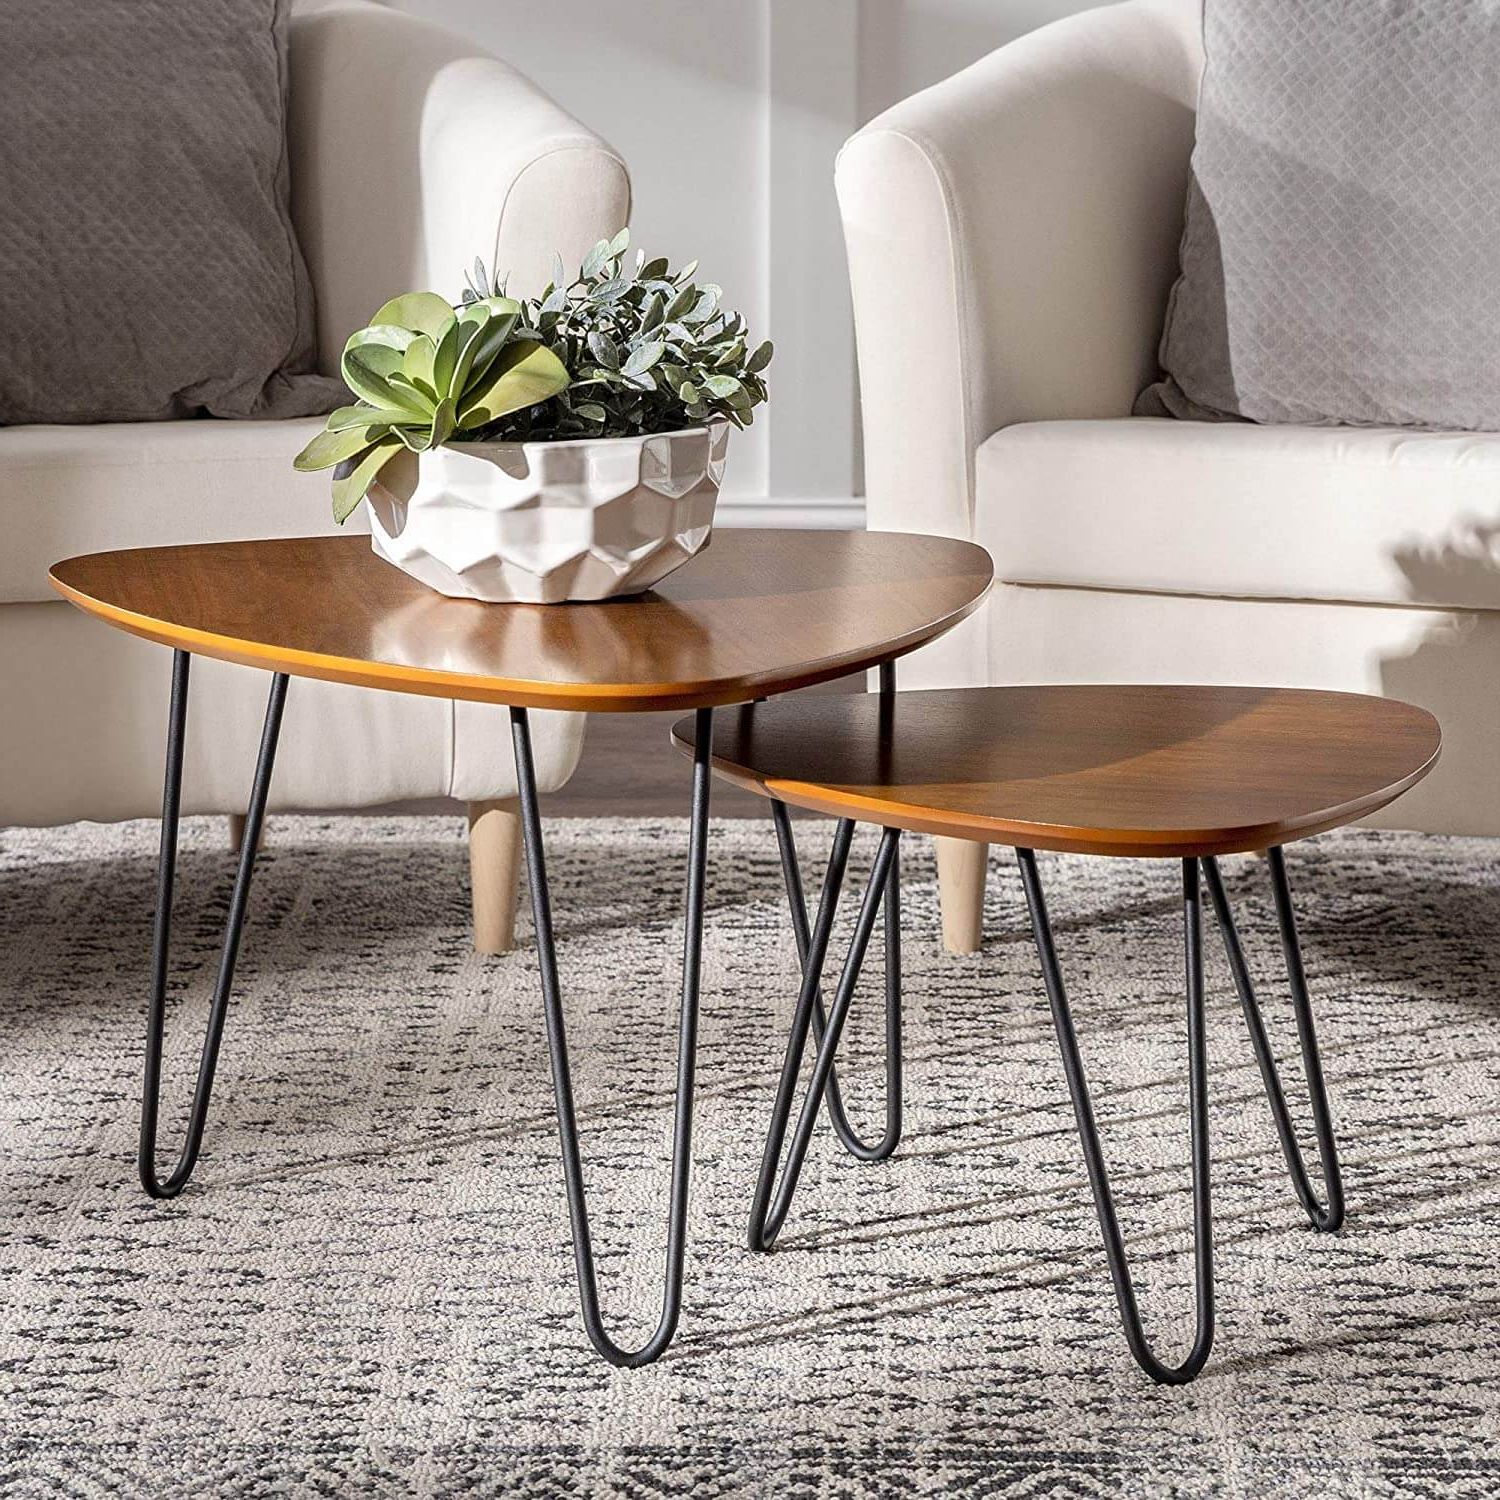 2019 Choosing The Perfect Mid Century Modern Coffee Table – Oceanone Interiors With Regard To Mid Century Modern Coffee Tables (Photo 11 of 15)